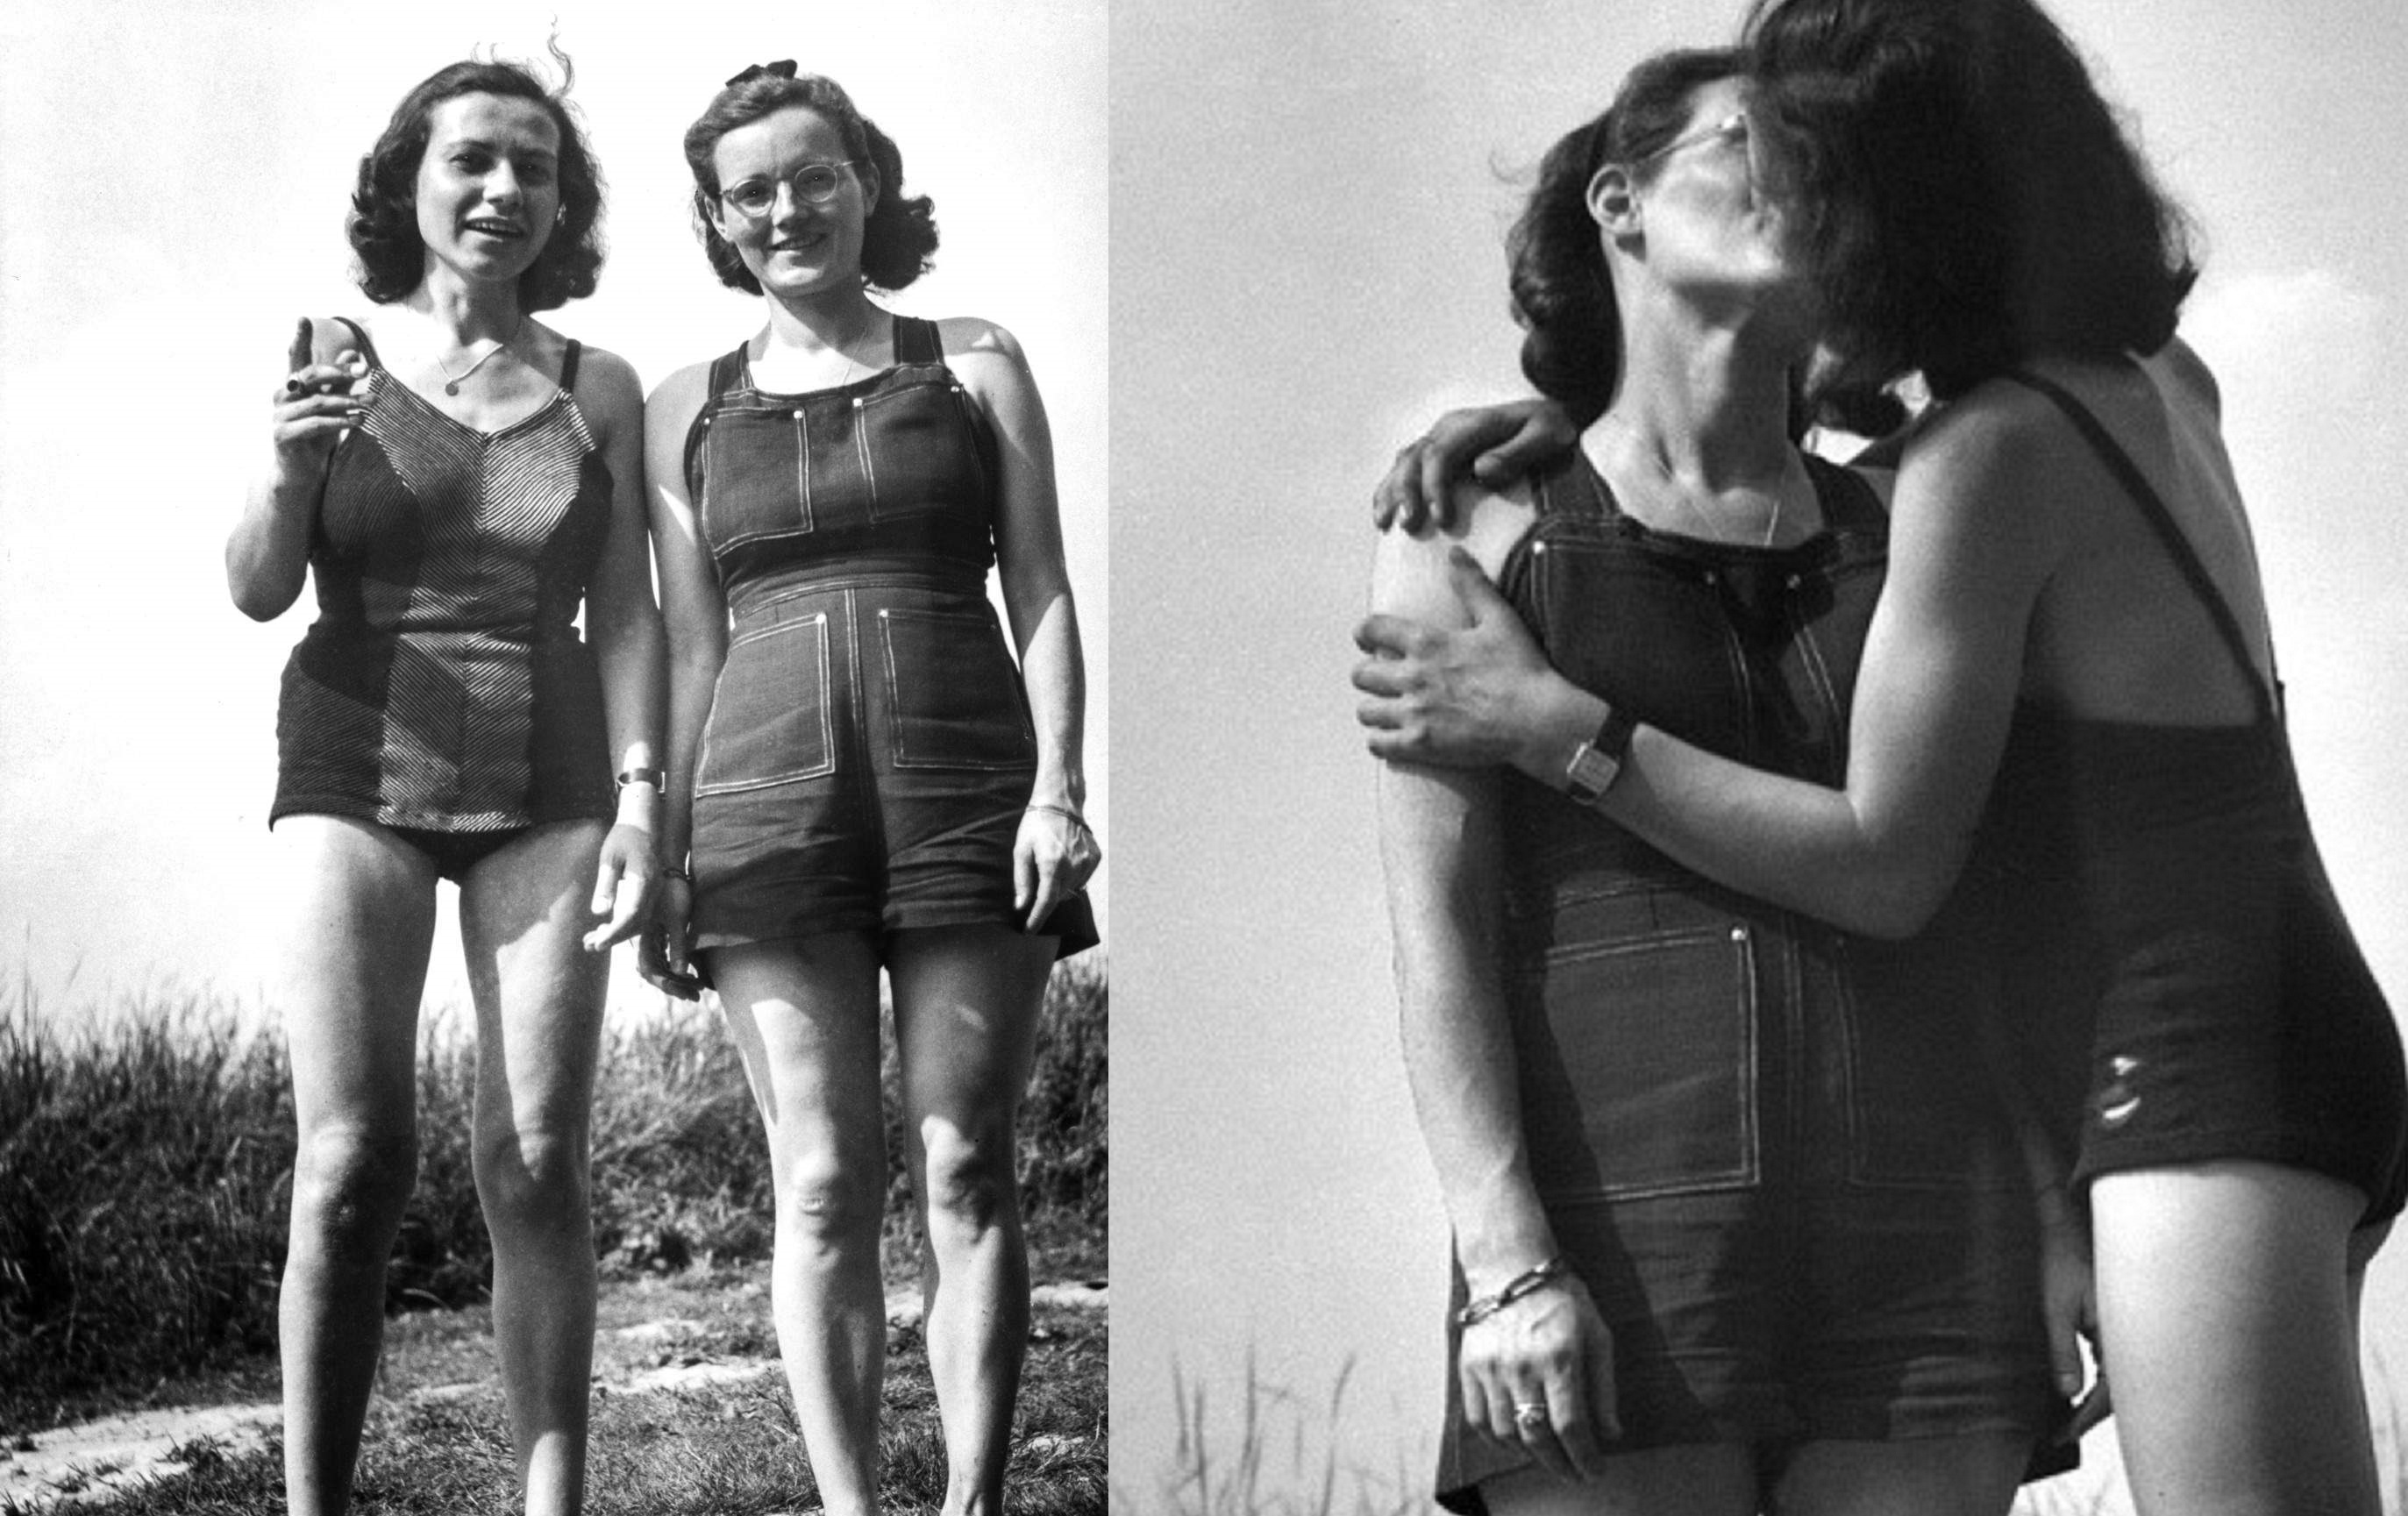 Felice Schragenheim and Lilly Wust pose for a few pictures somewhere in Germany in 1944. The pair were lovers, and Schragenheim was actually Jewish, fighting with the Jewish Resistance in Germany. She was unfortunately caught later that year and died during the death march from KZ Auschwitz Birkenau to KZ Bergen-Belsen. Wust was actually the wife of a German officer. She survived the war and would stay married and have 4 children. Their story became both a book and a movie by the same name, Aimée & Jaguar.